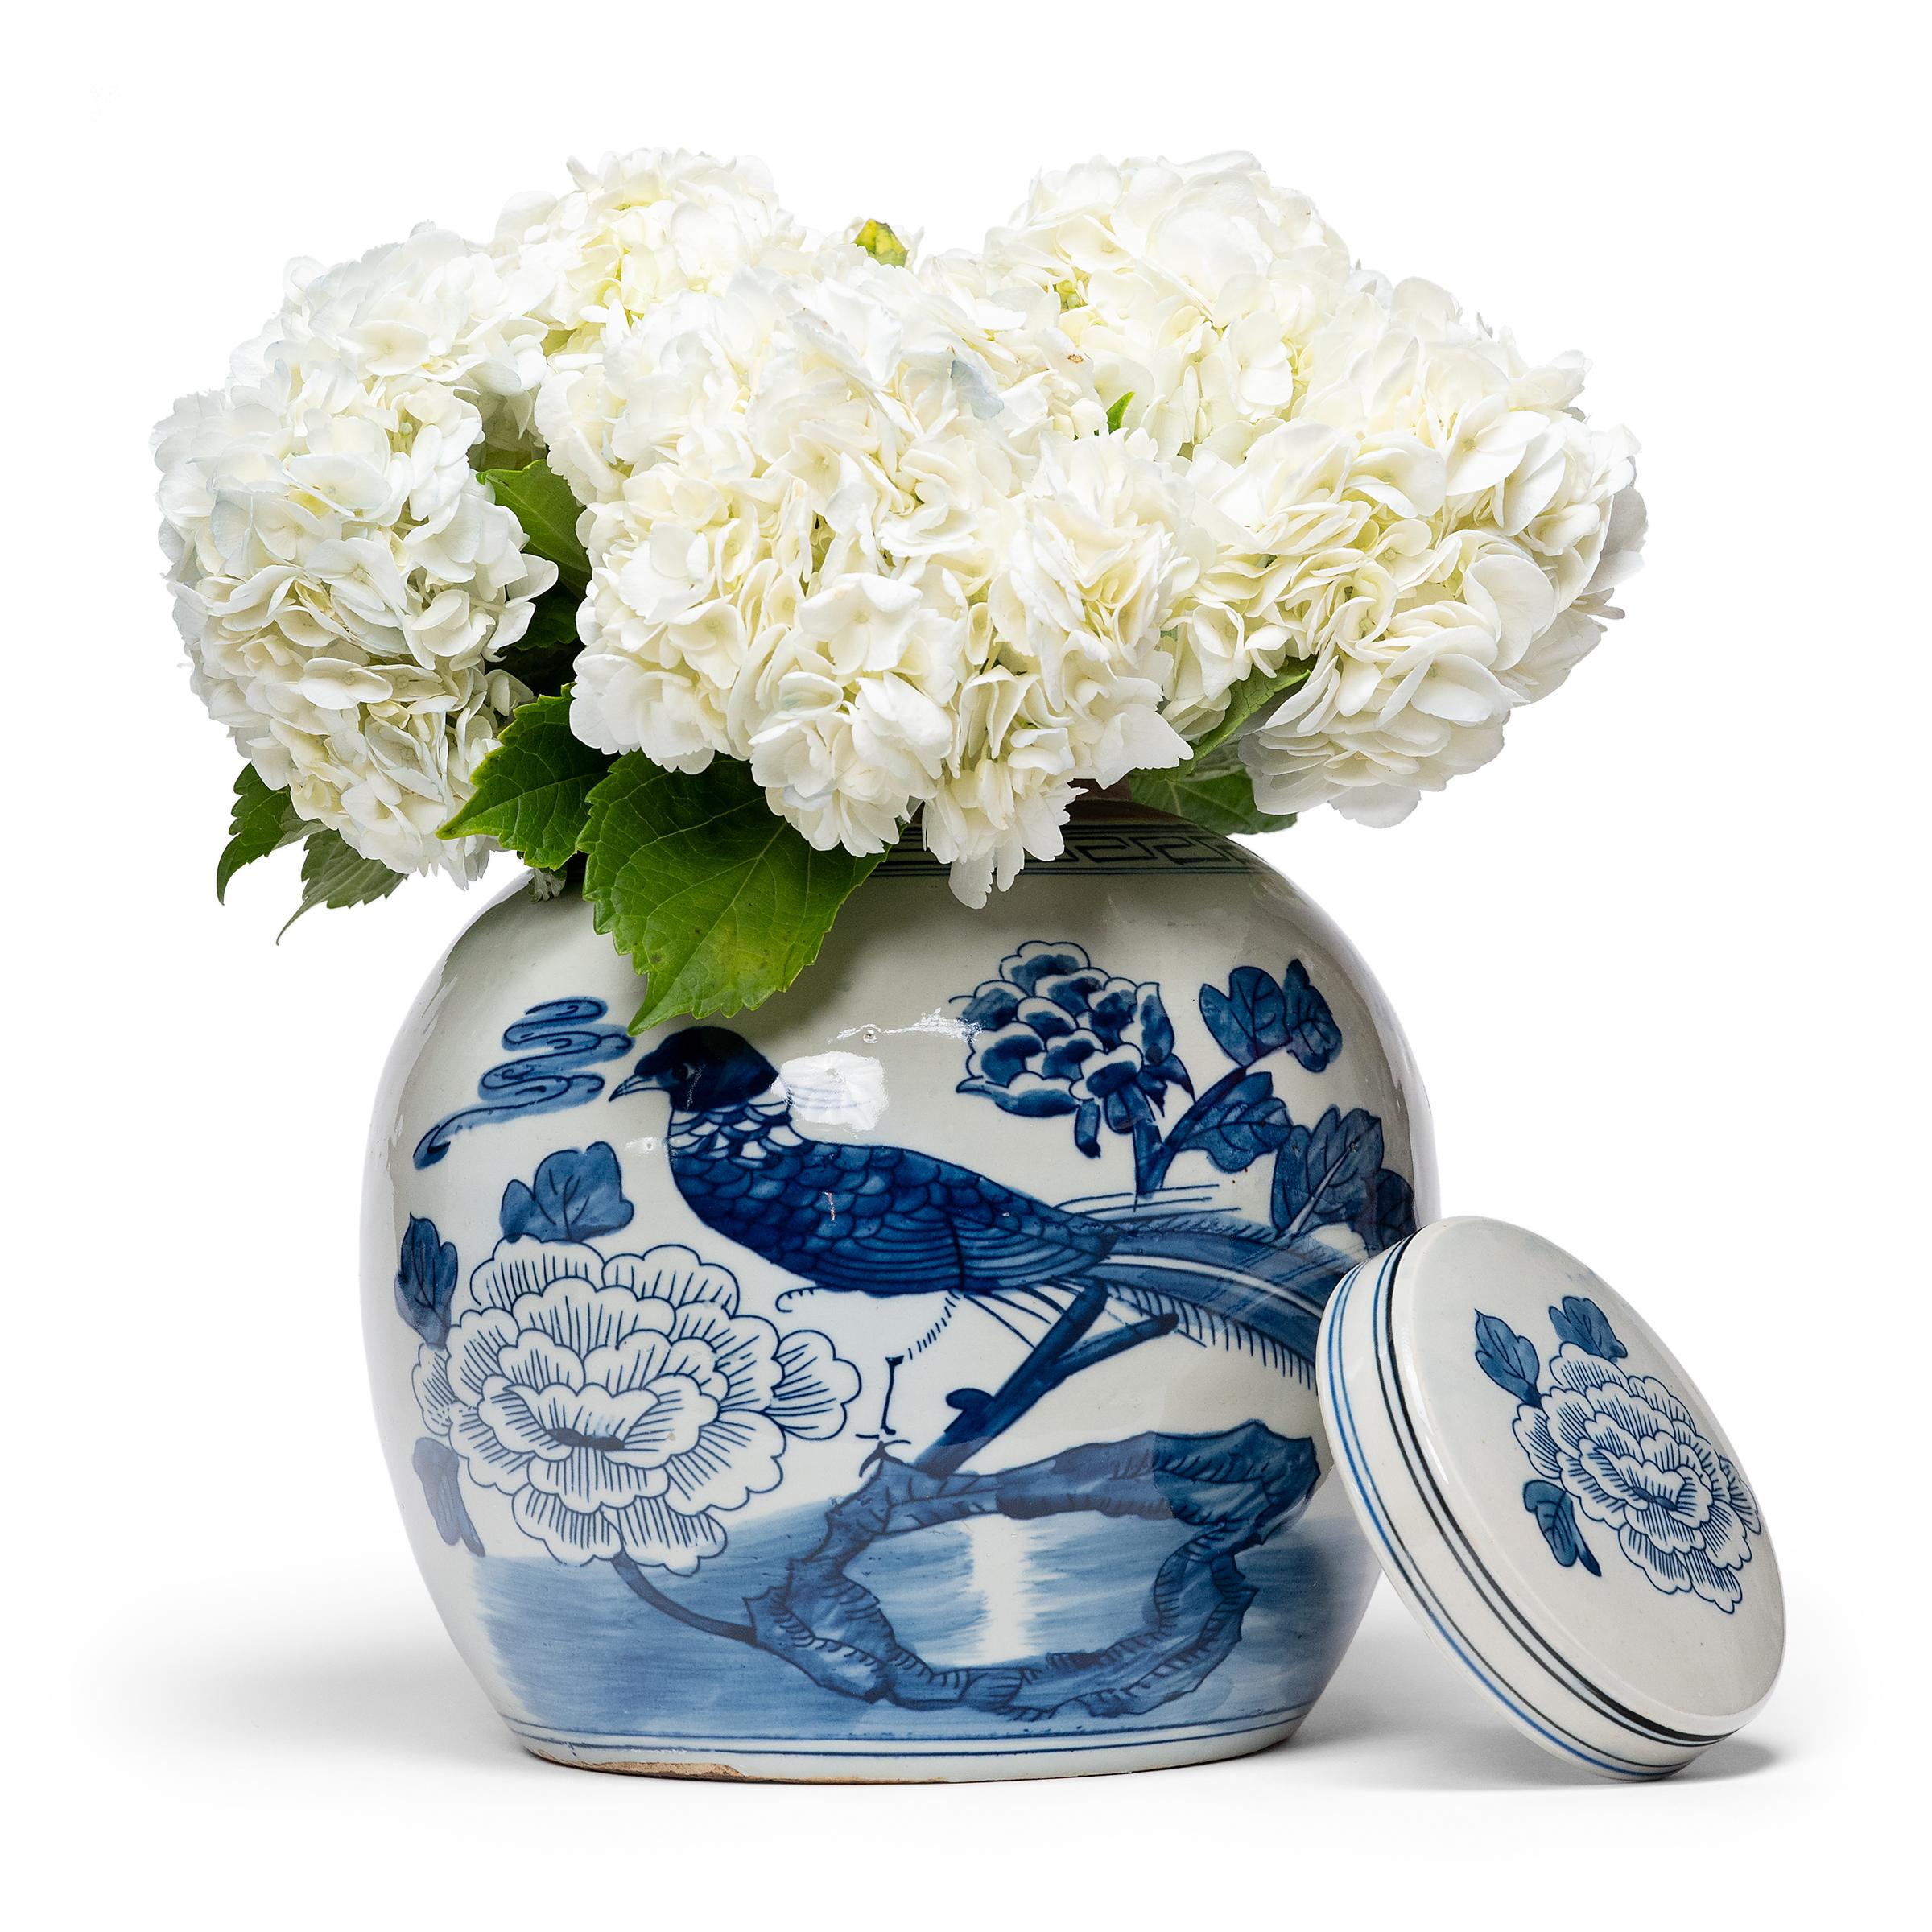 Loosely brushed with cobalt blue pigments, this round blue-and-white storage jar is adorned with a ribbon-tailed bird perched on a cluster of rocks, a symbol for a long and happy life. In combination with the surrounding peony blossoms, emblems of